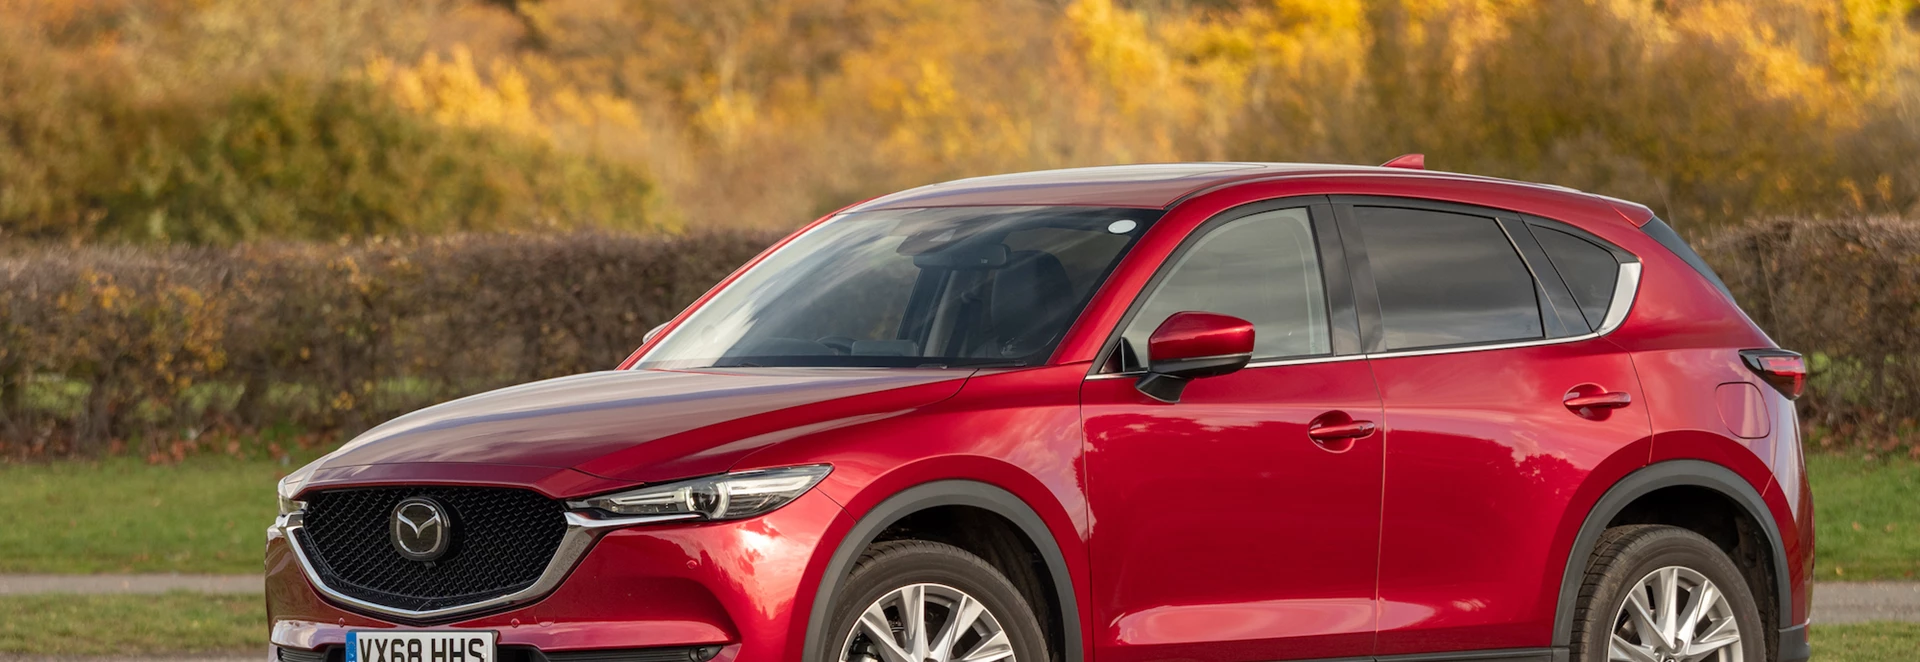 Why Mazda’s CX-5 is one of the hottest SUVs on the market…